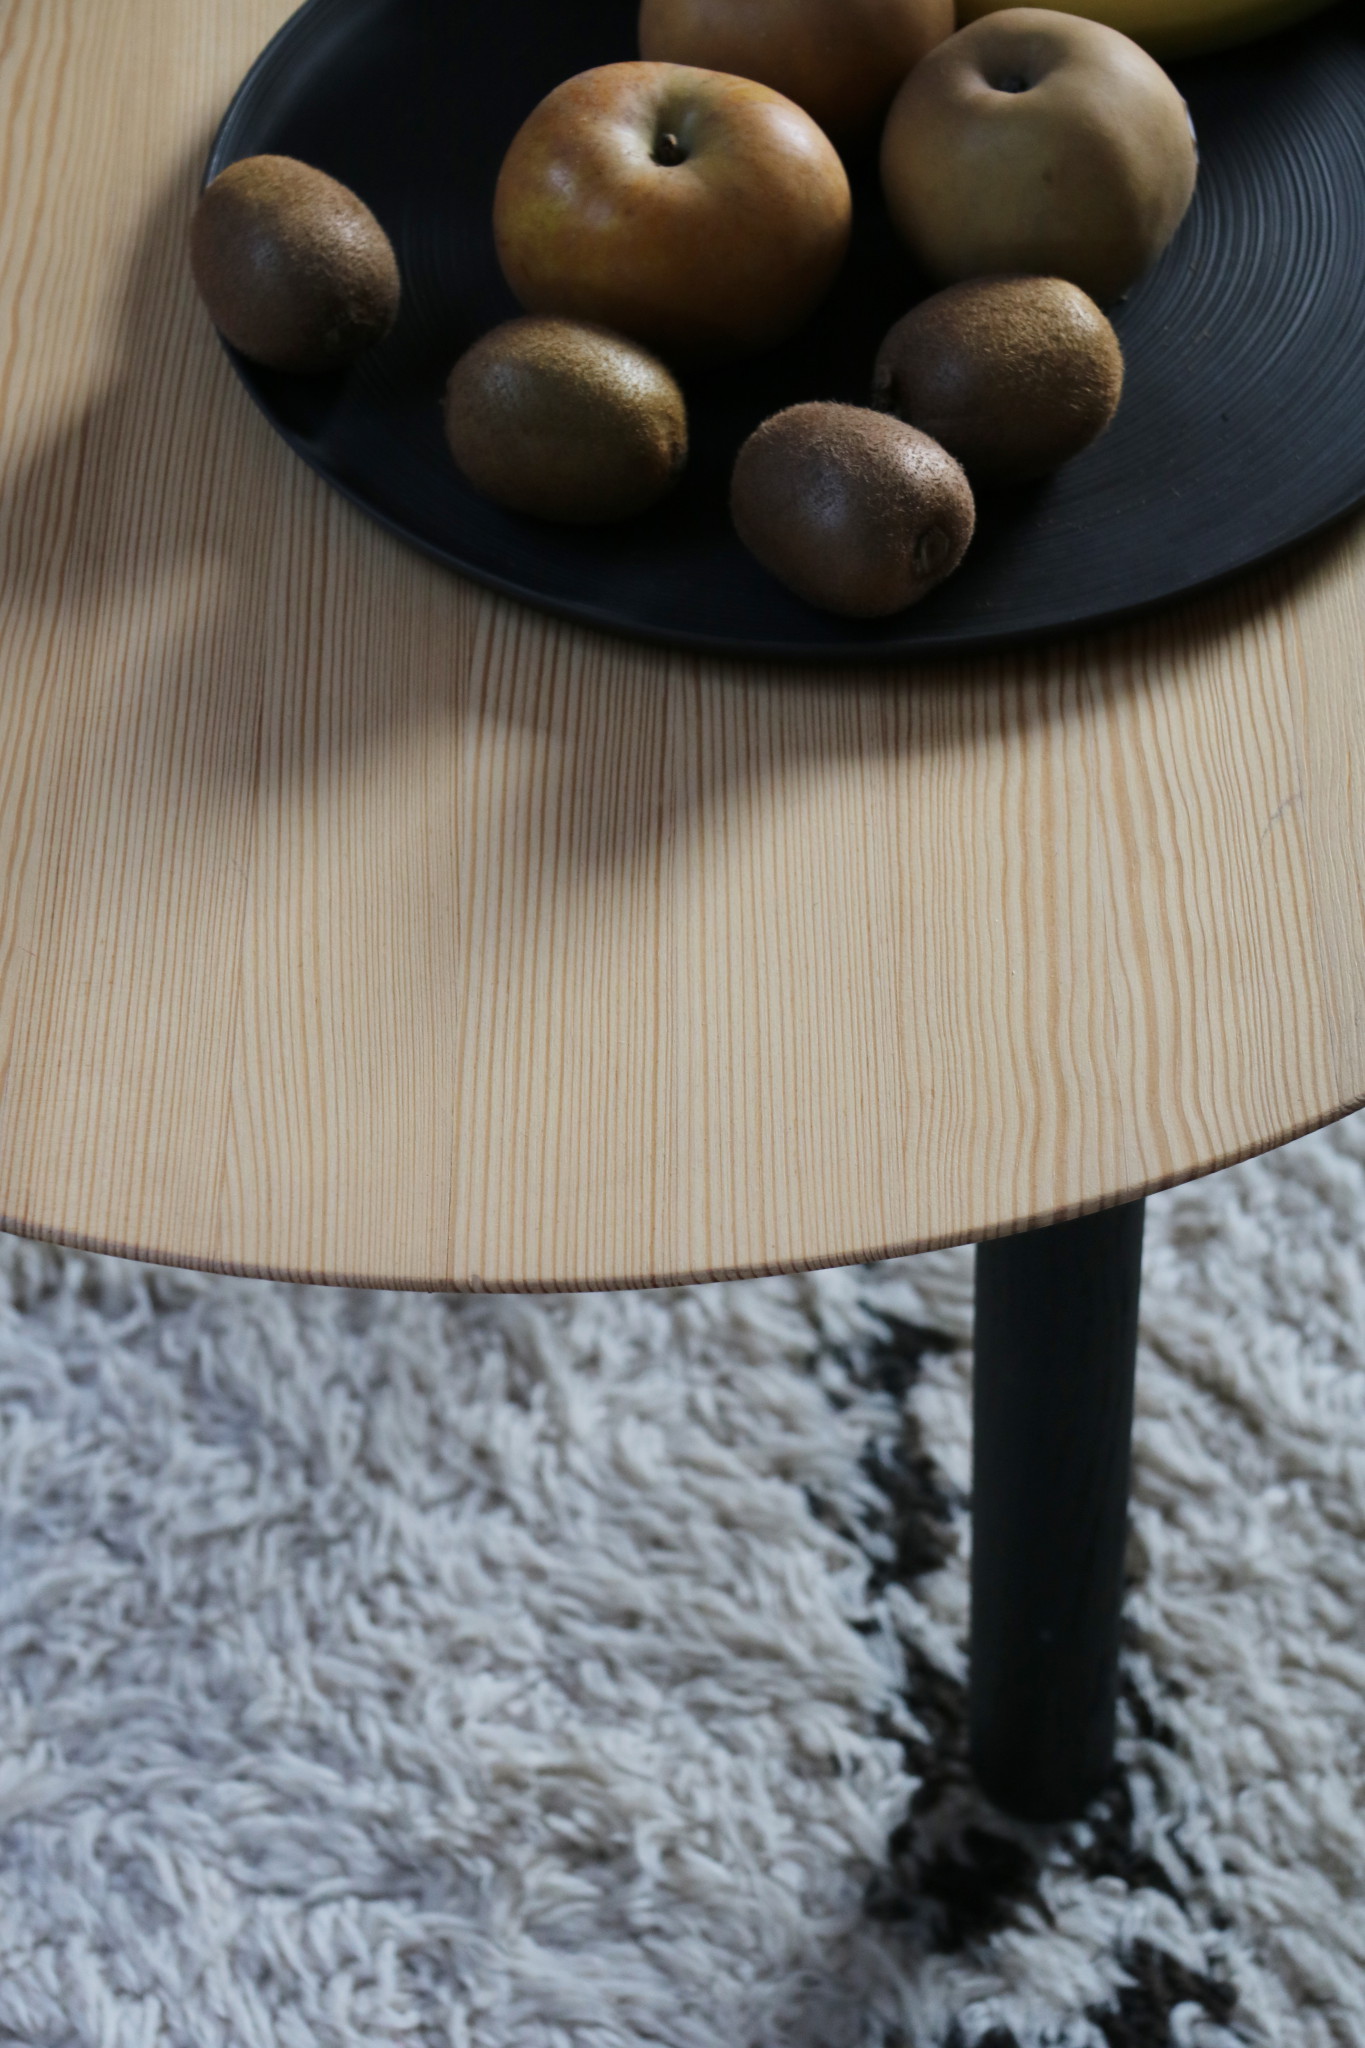 Nonjetable-Round-Solid-Pine-Table-Detail-Fruits